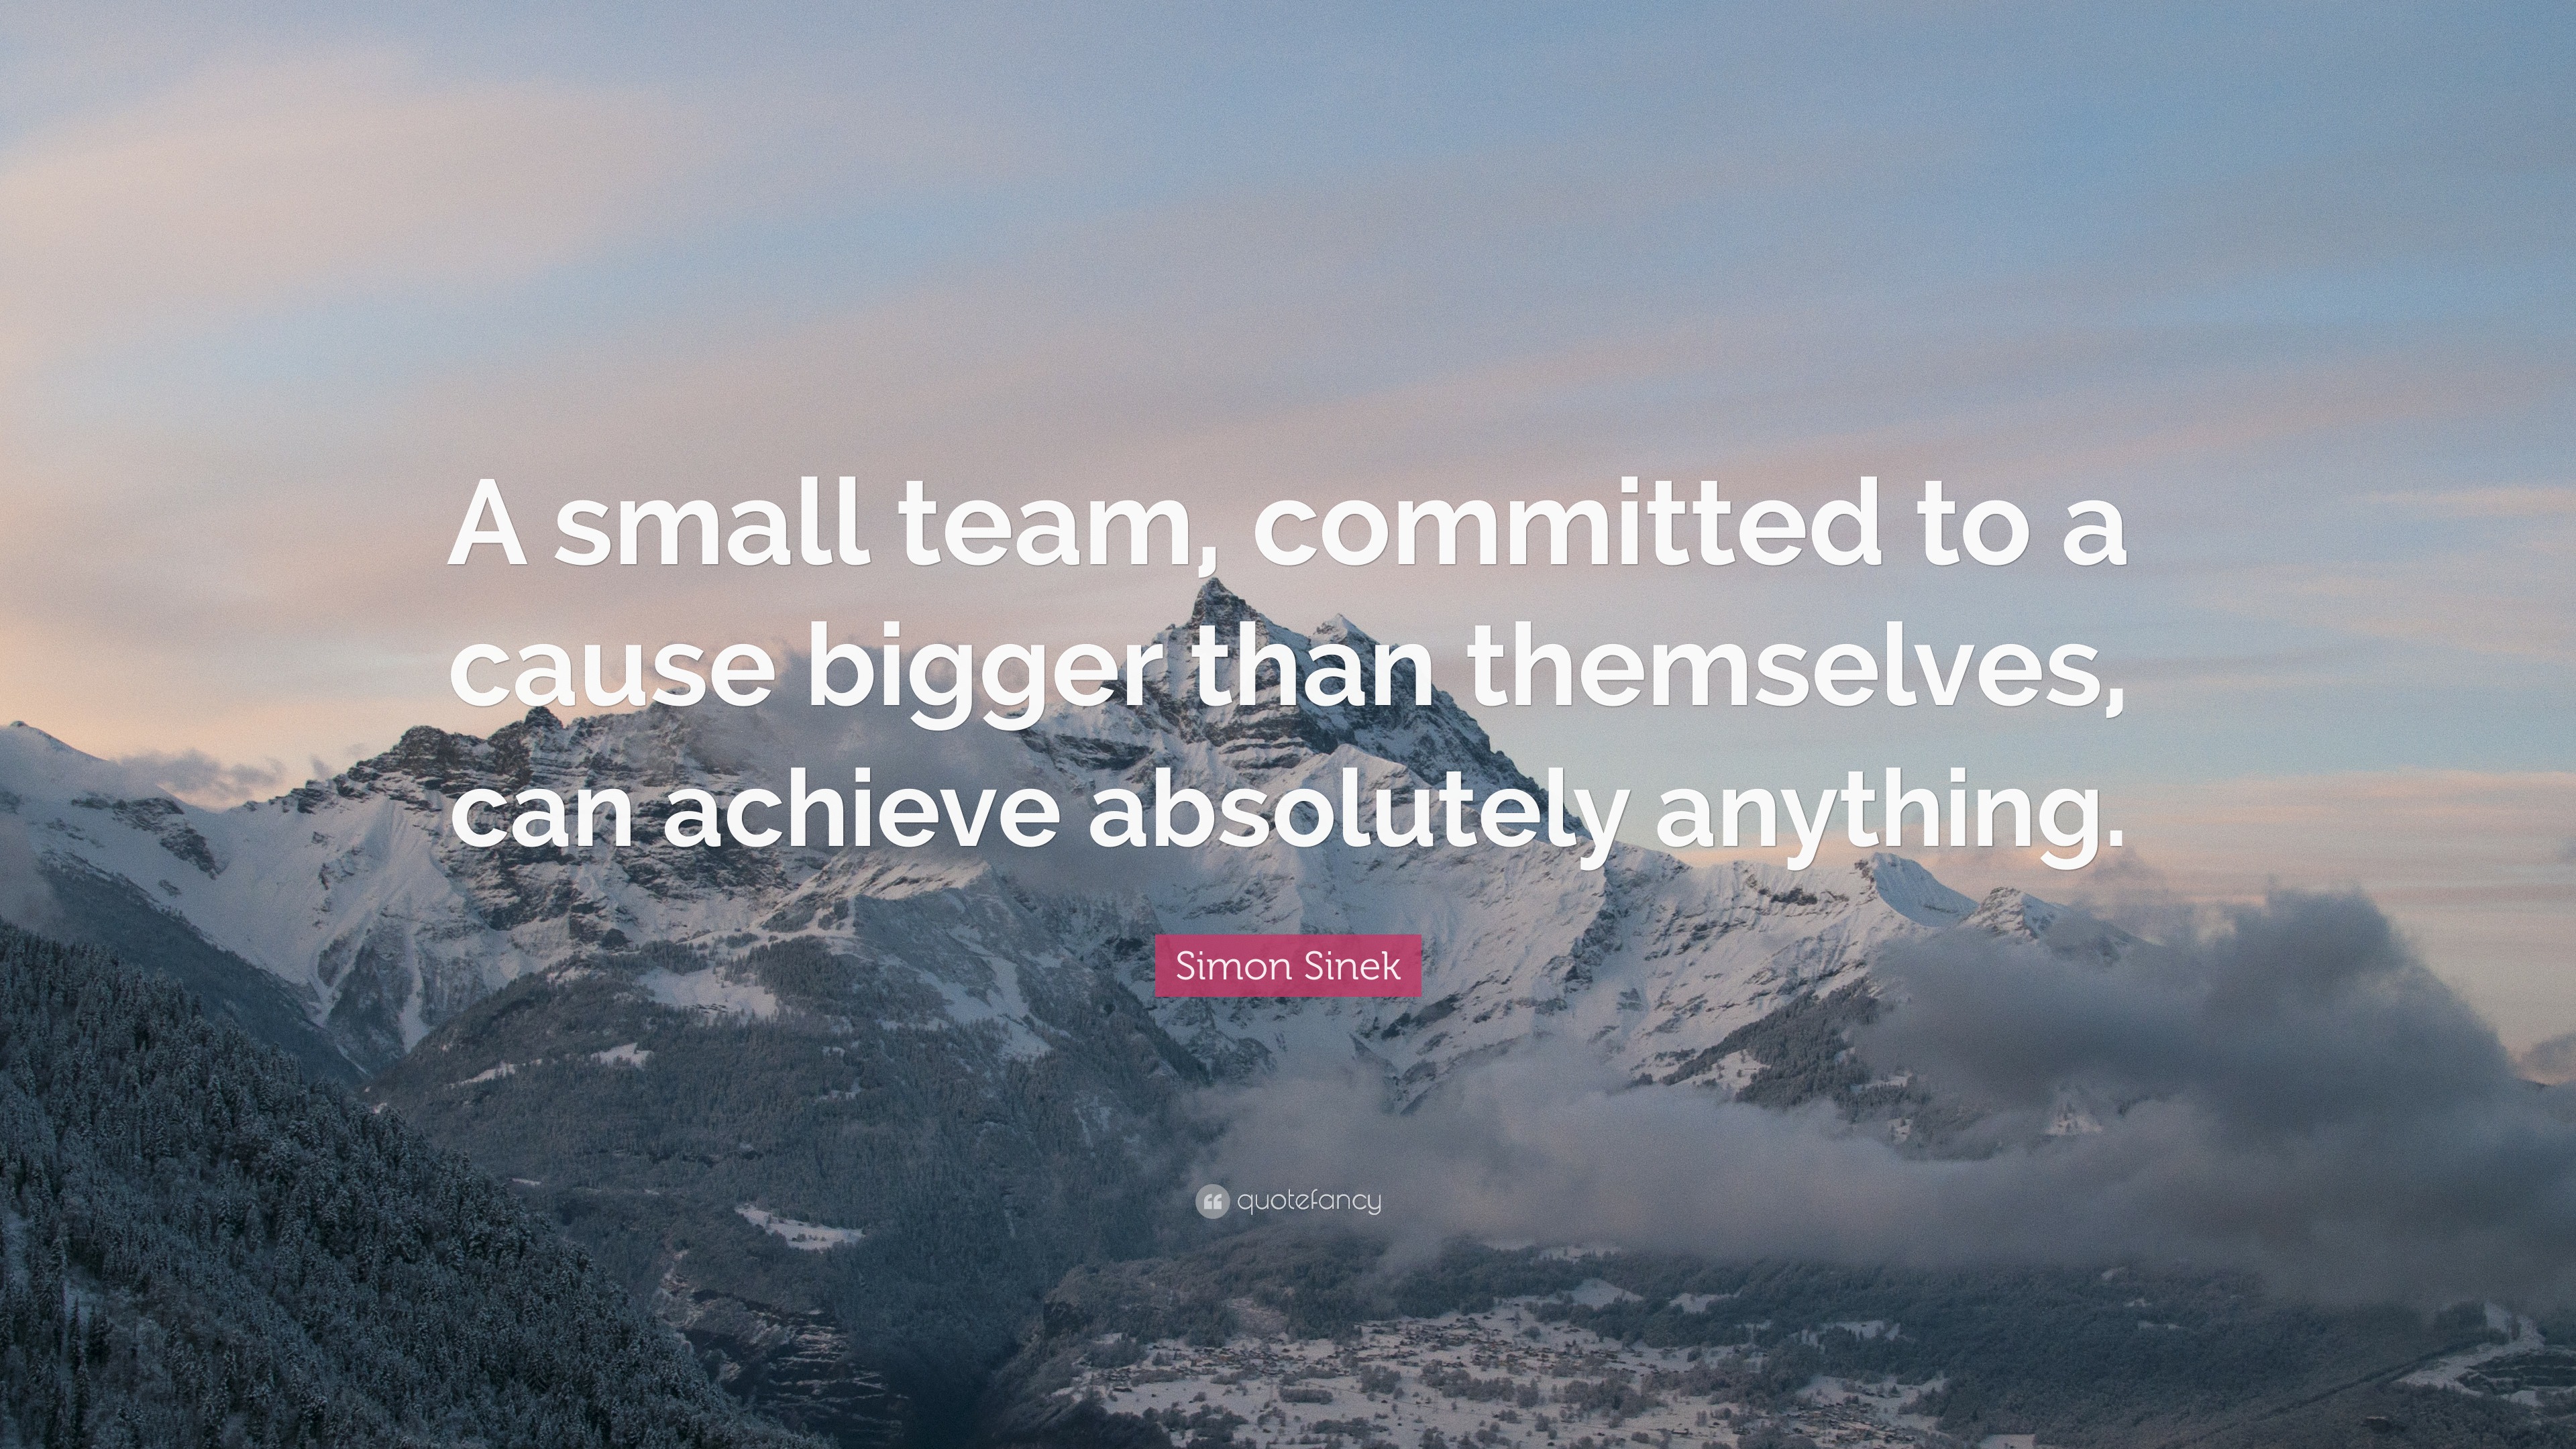 Simon Sinek Quote: “A small team, committed to a cause bigger than ...